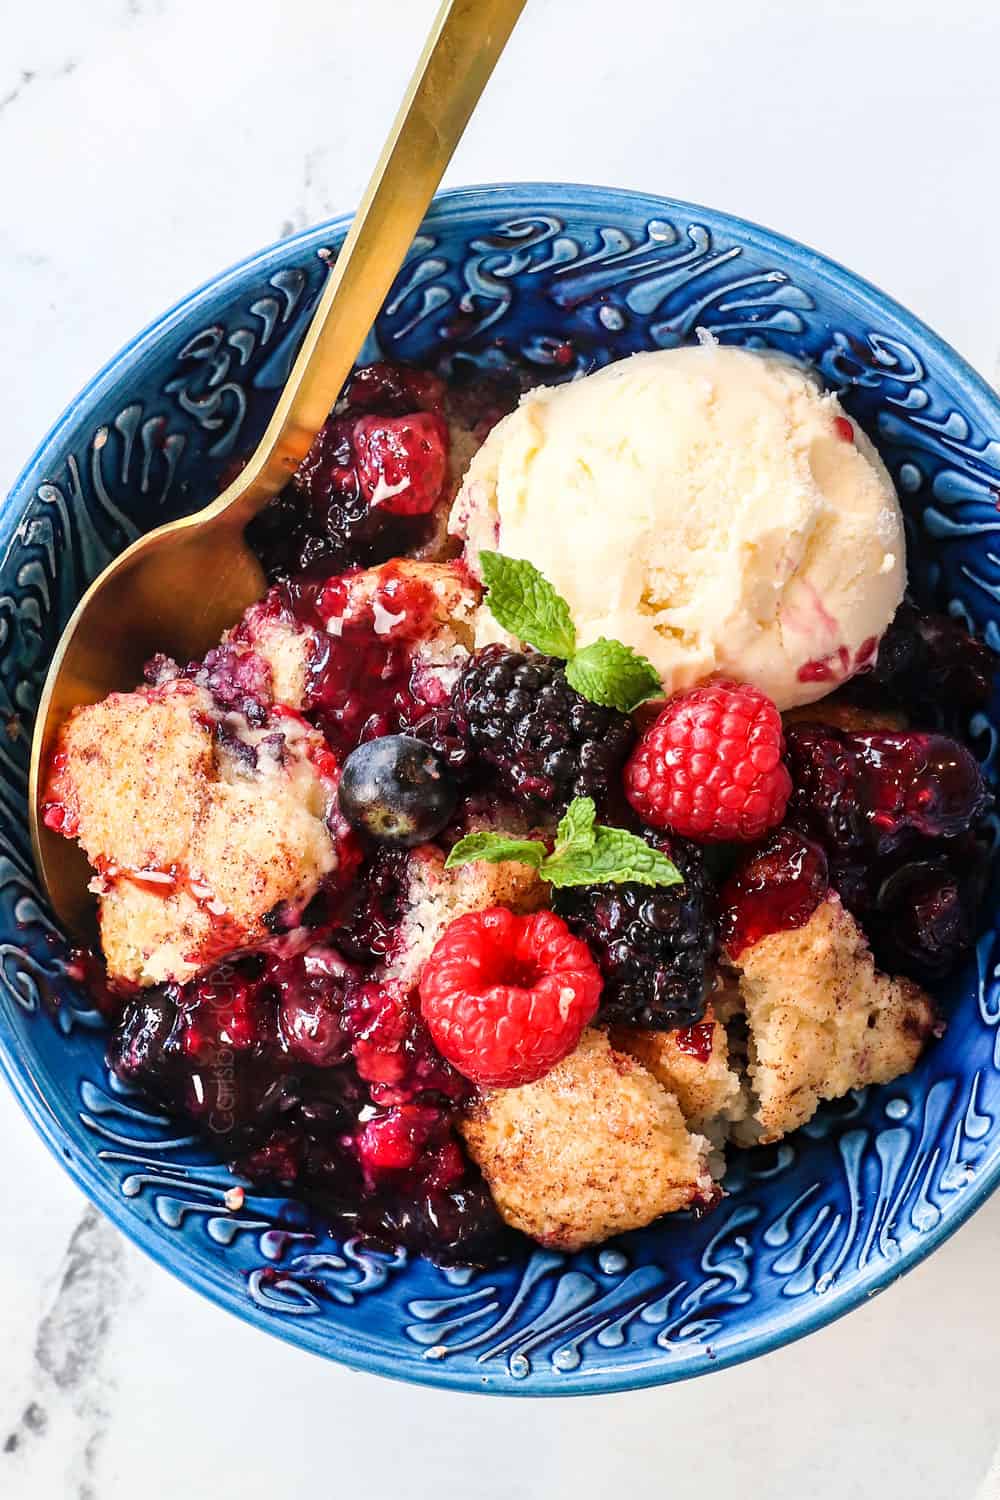 top view of a bowl of mixed berry cobbler with blackberries, blueberries, raspberries and strawberries